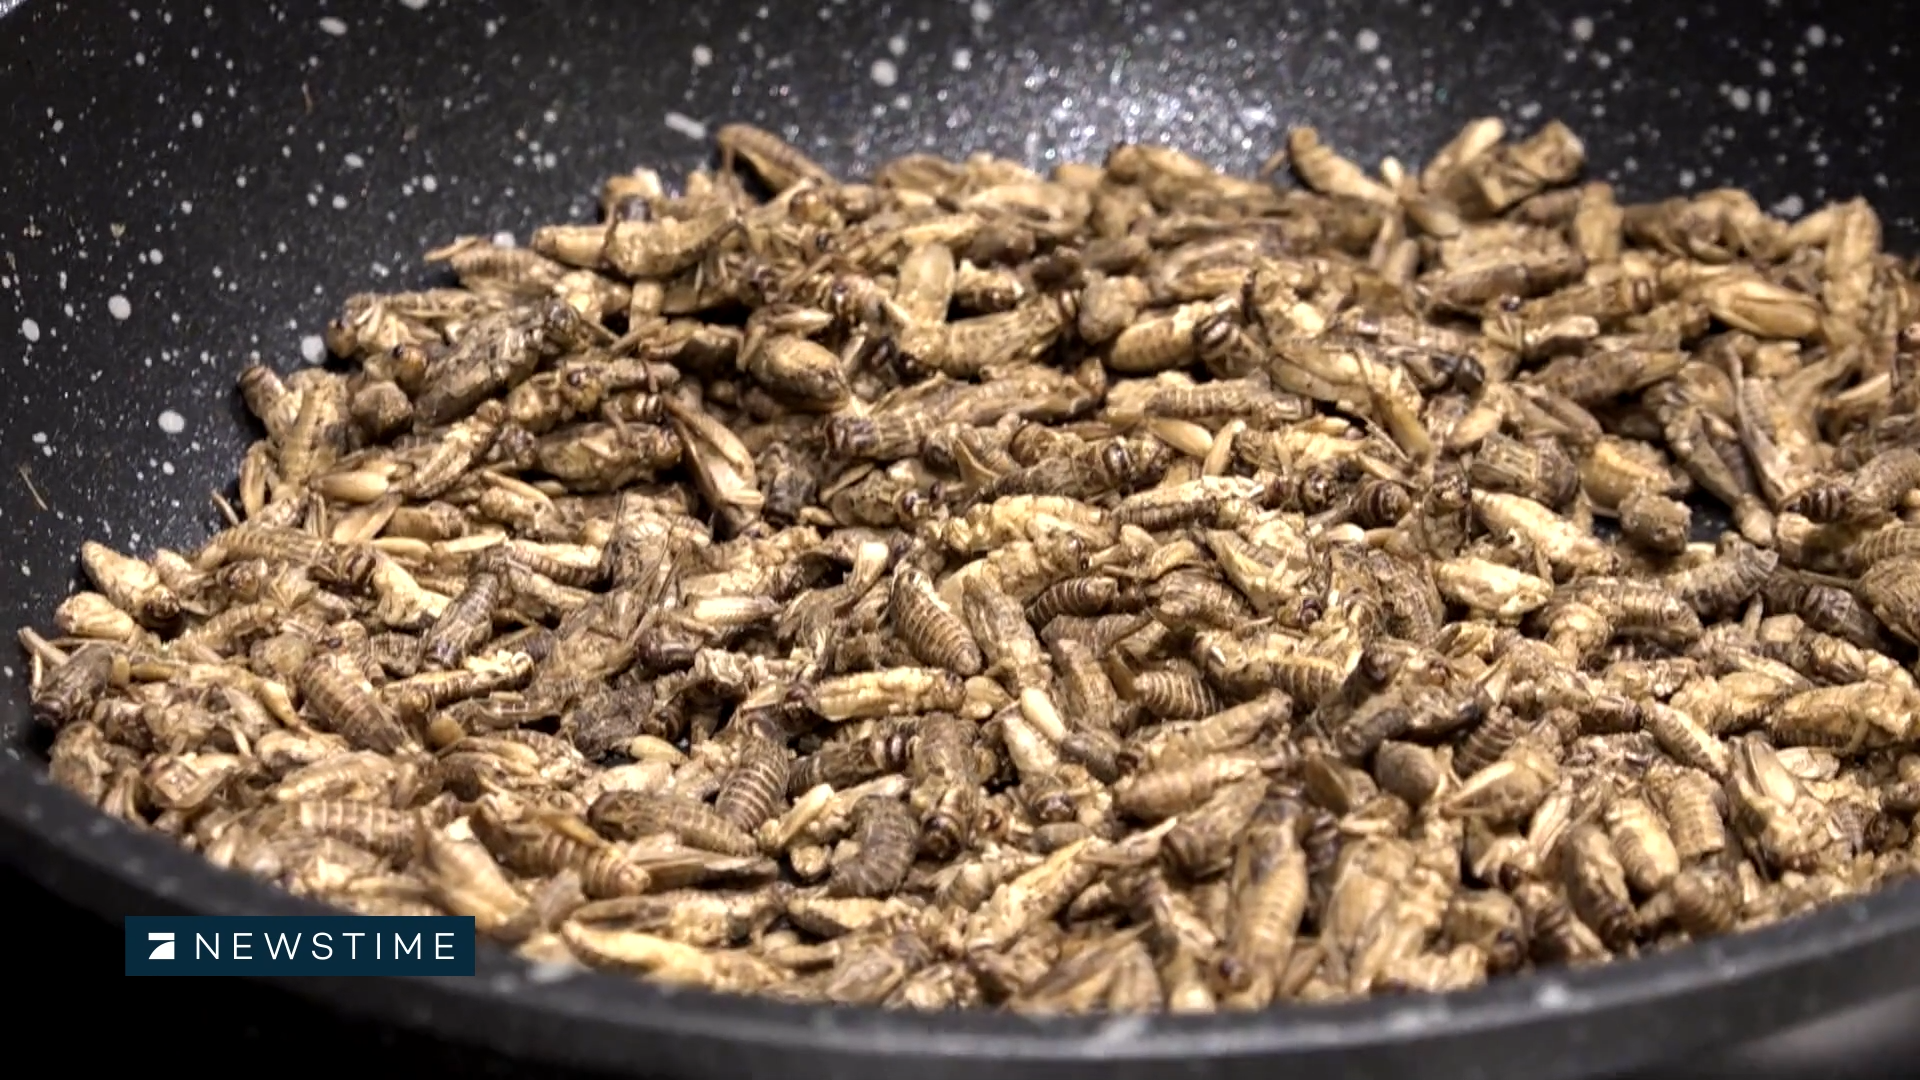 Insects in food: "Much healthier" than beef, pork and turkey?